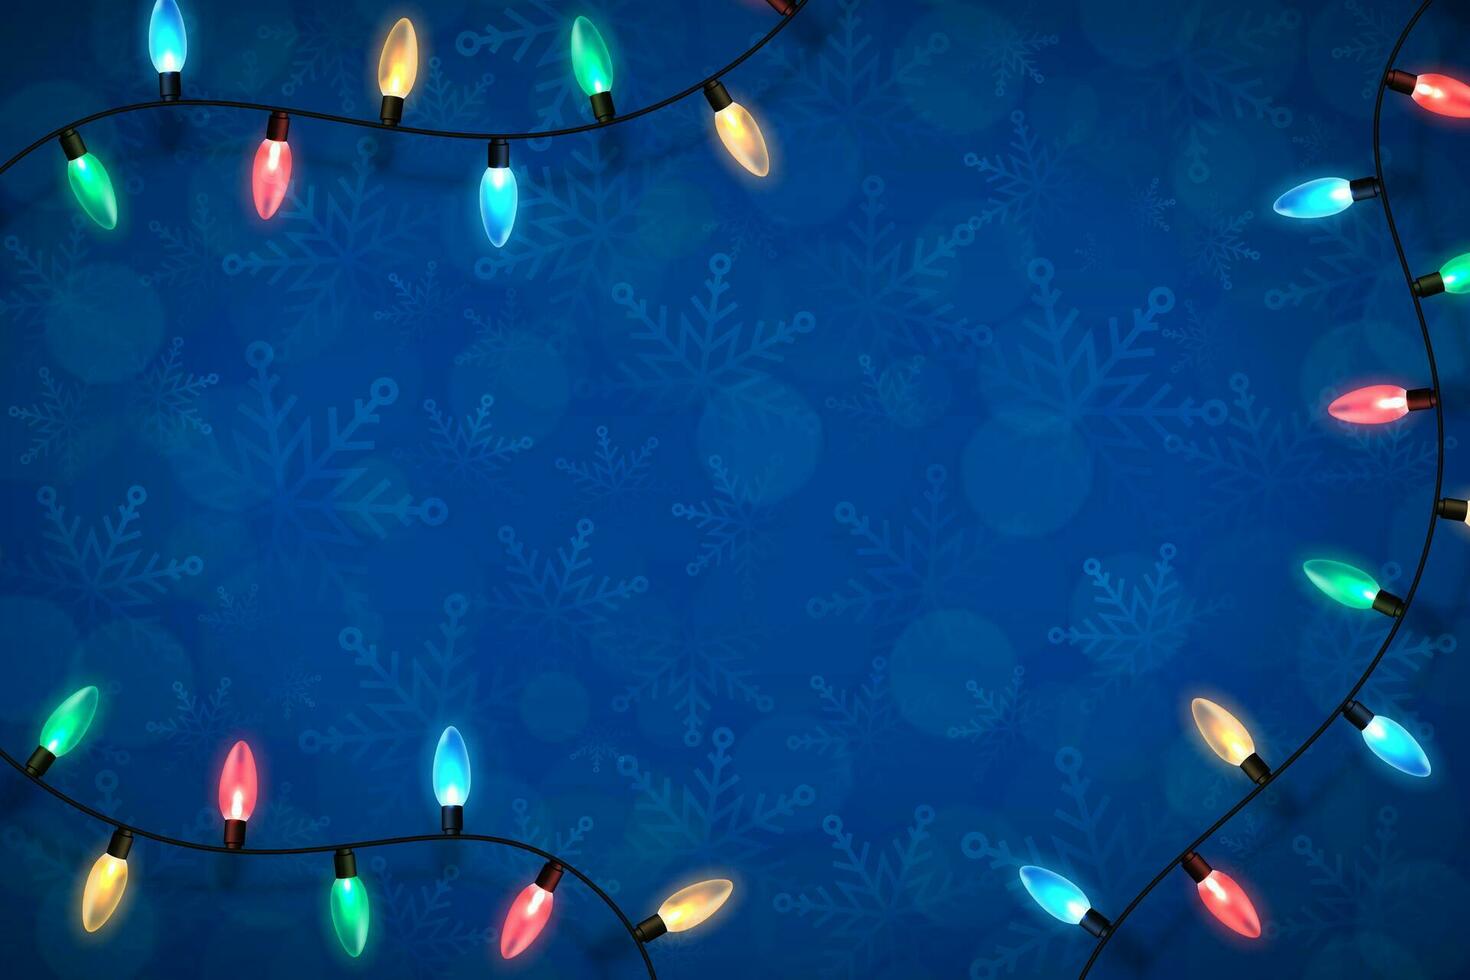 Christmas blue backdrop with lights garland over winter themed pattern with snowflakes and blurred bokeh lights. Festive design element for xmas holiday poster, banner, card or social media posting vector